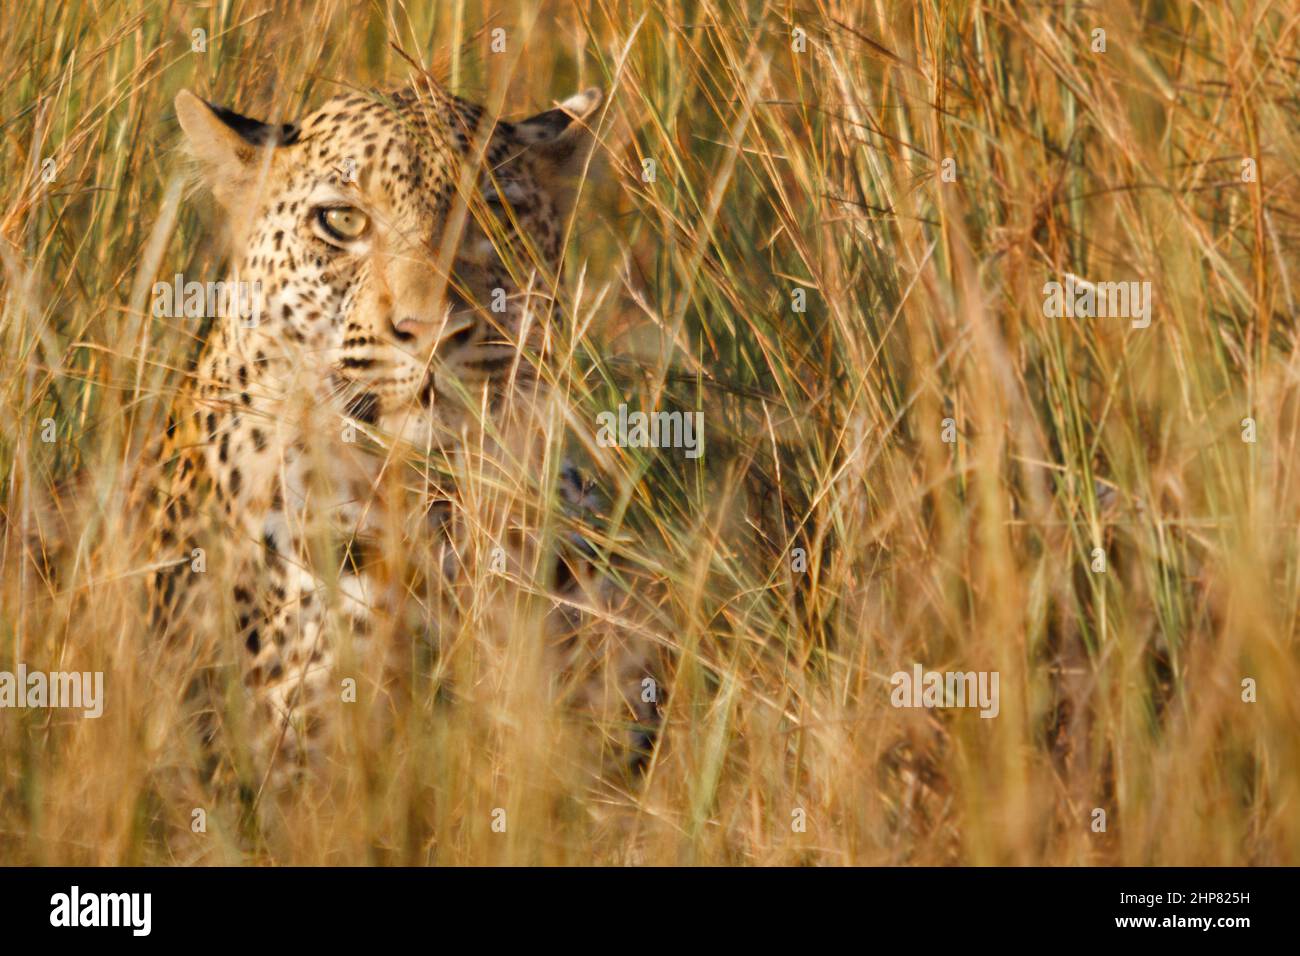 Leopard, Panthera pardus, female, in dense stand of Spear Grass, Heteropogon contortus, Kruger National Park, Limpopo Province, South Africa Stock Photo